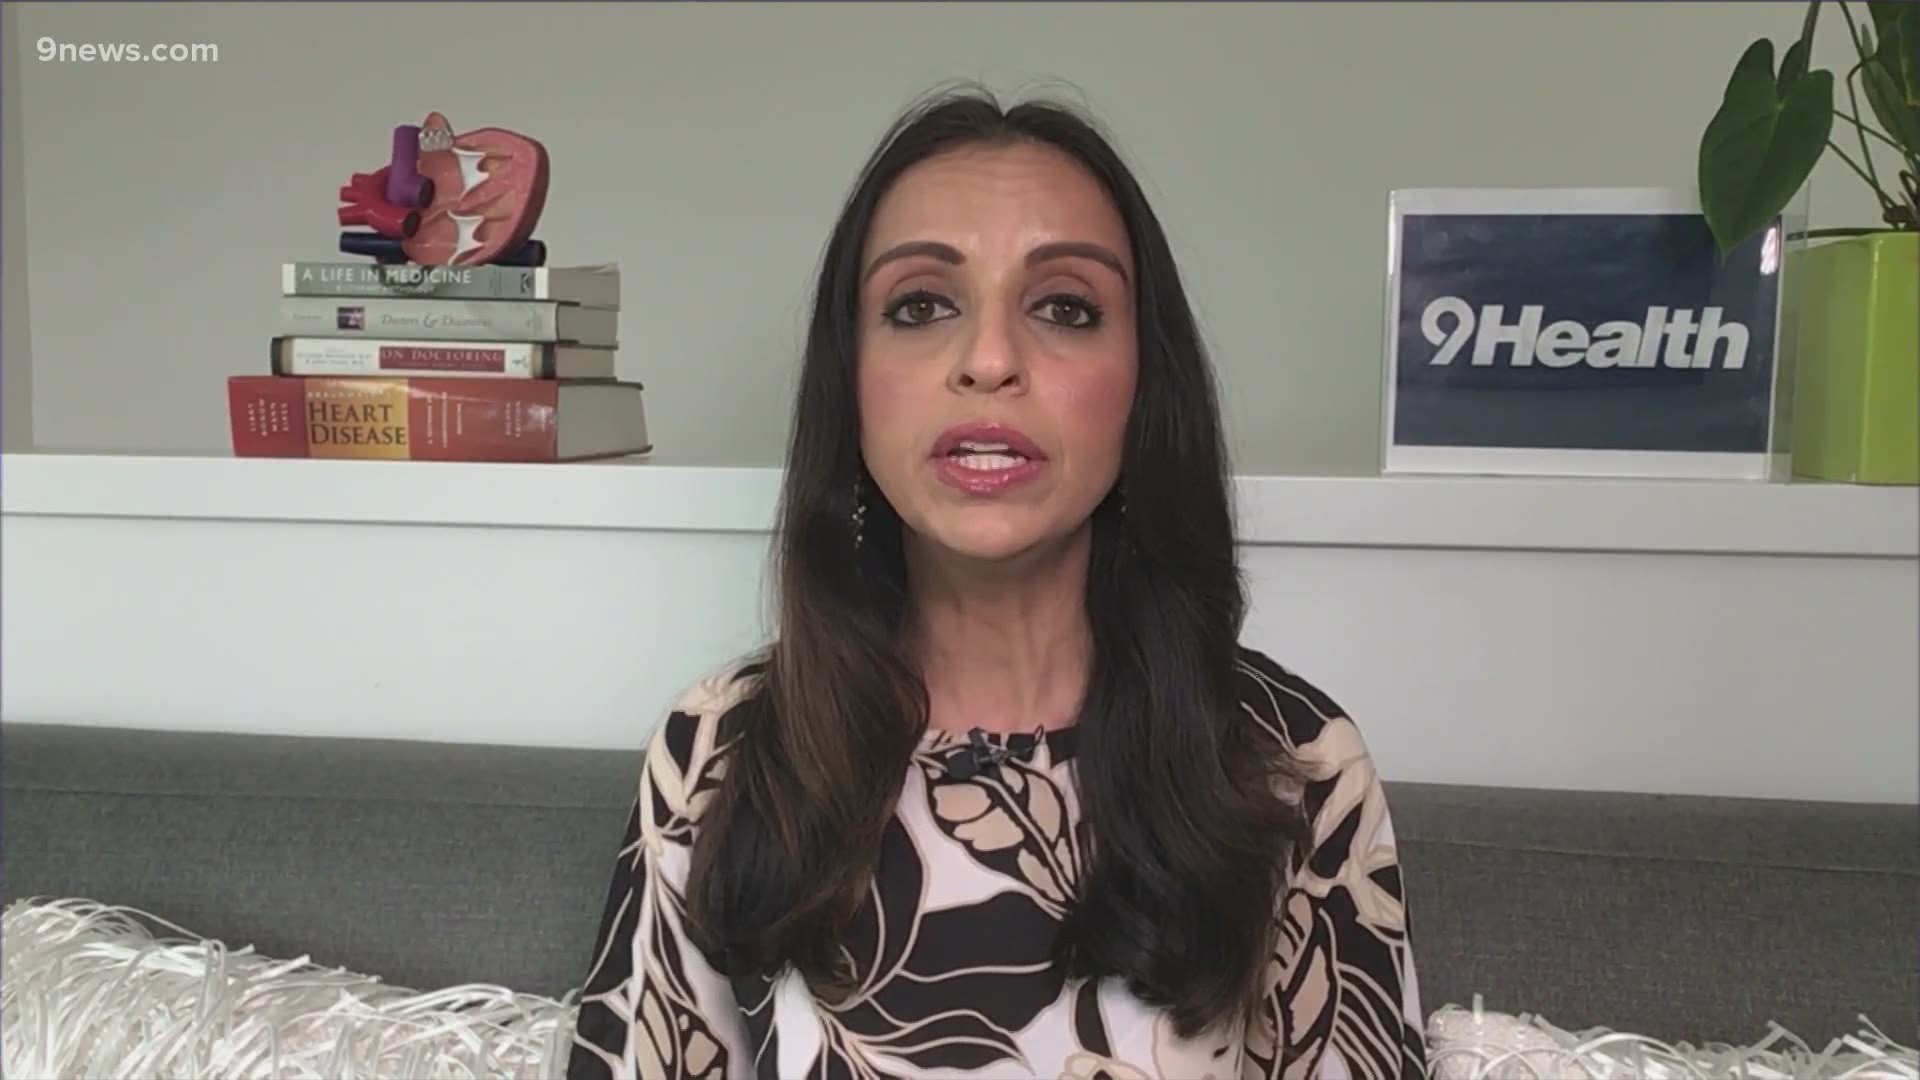 9Health expert Dr. Payal Kohli explains how to send kids back to school safely in the fall.